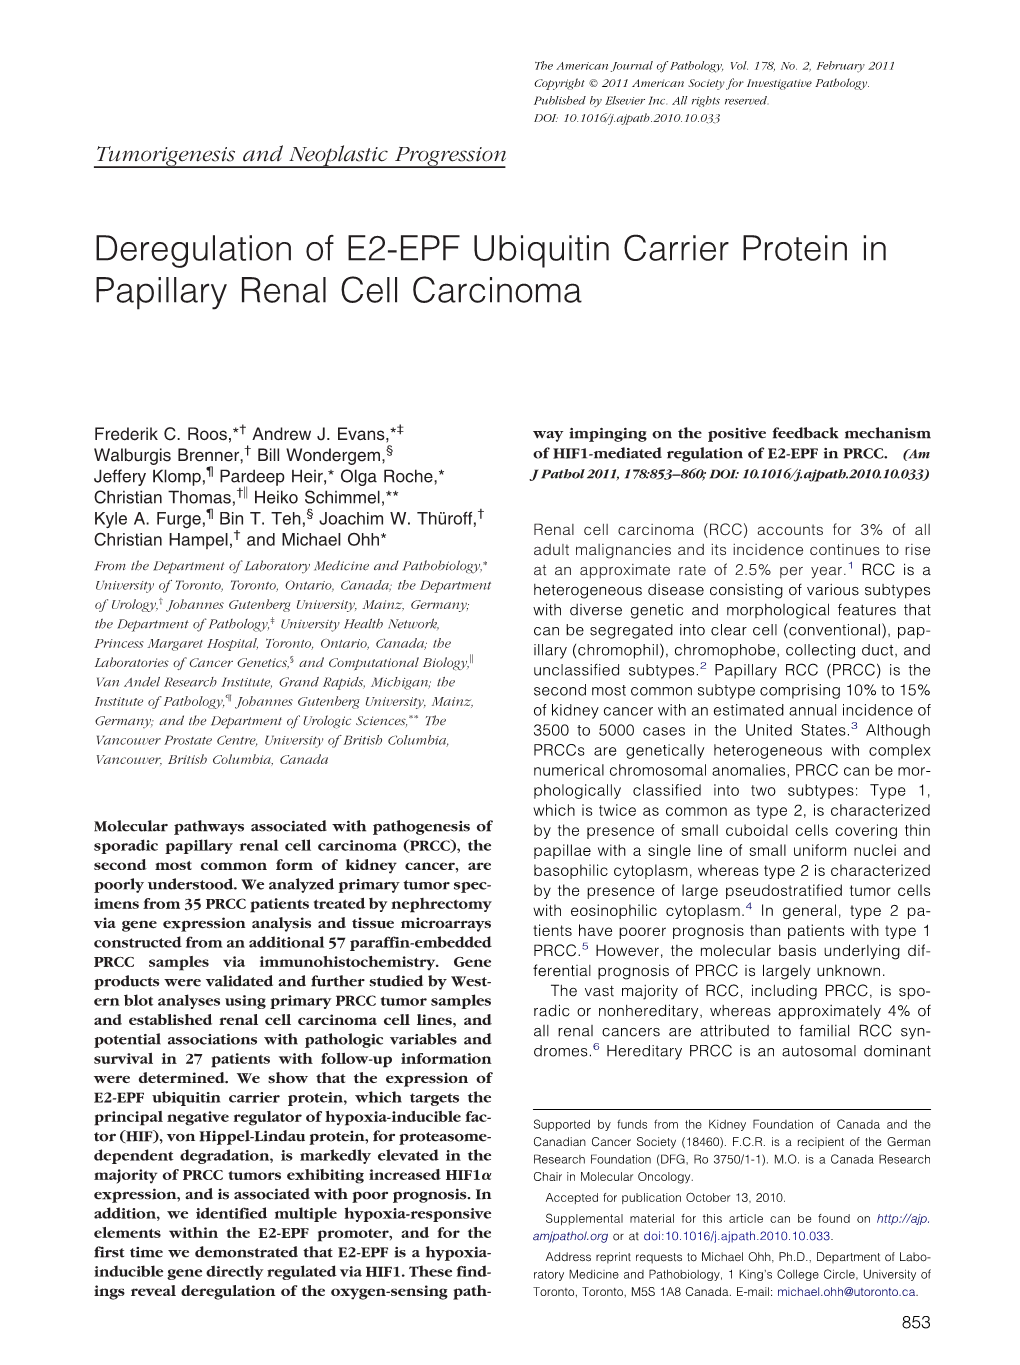 Deregulation of E2-EPF Ubiquitin Carrier Protein in Papillary Renal Cell Carcinoma